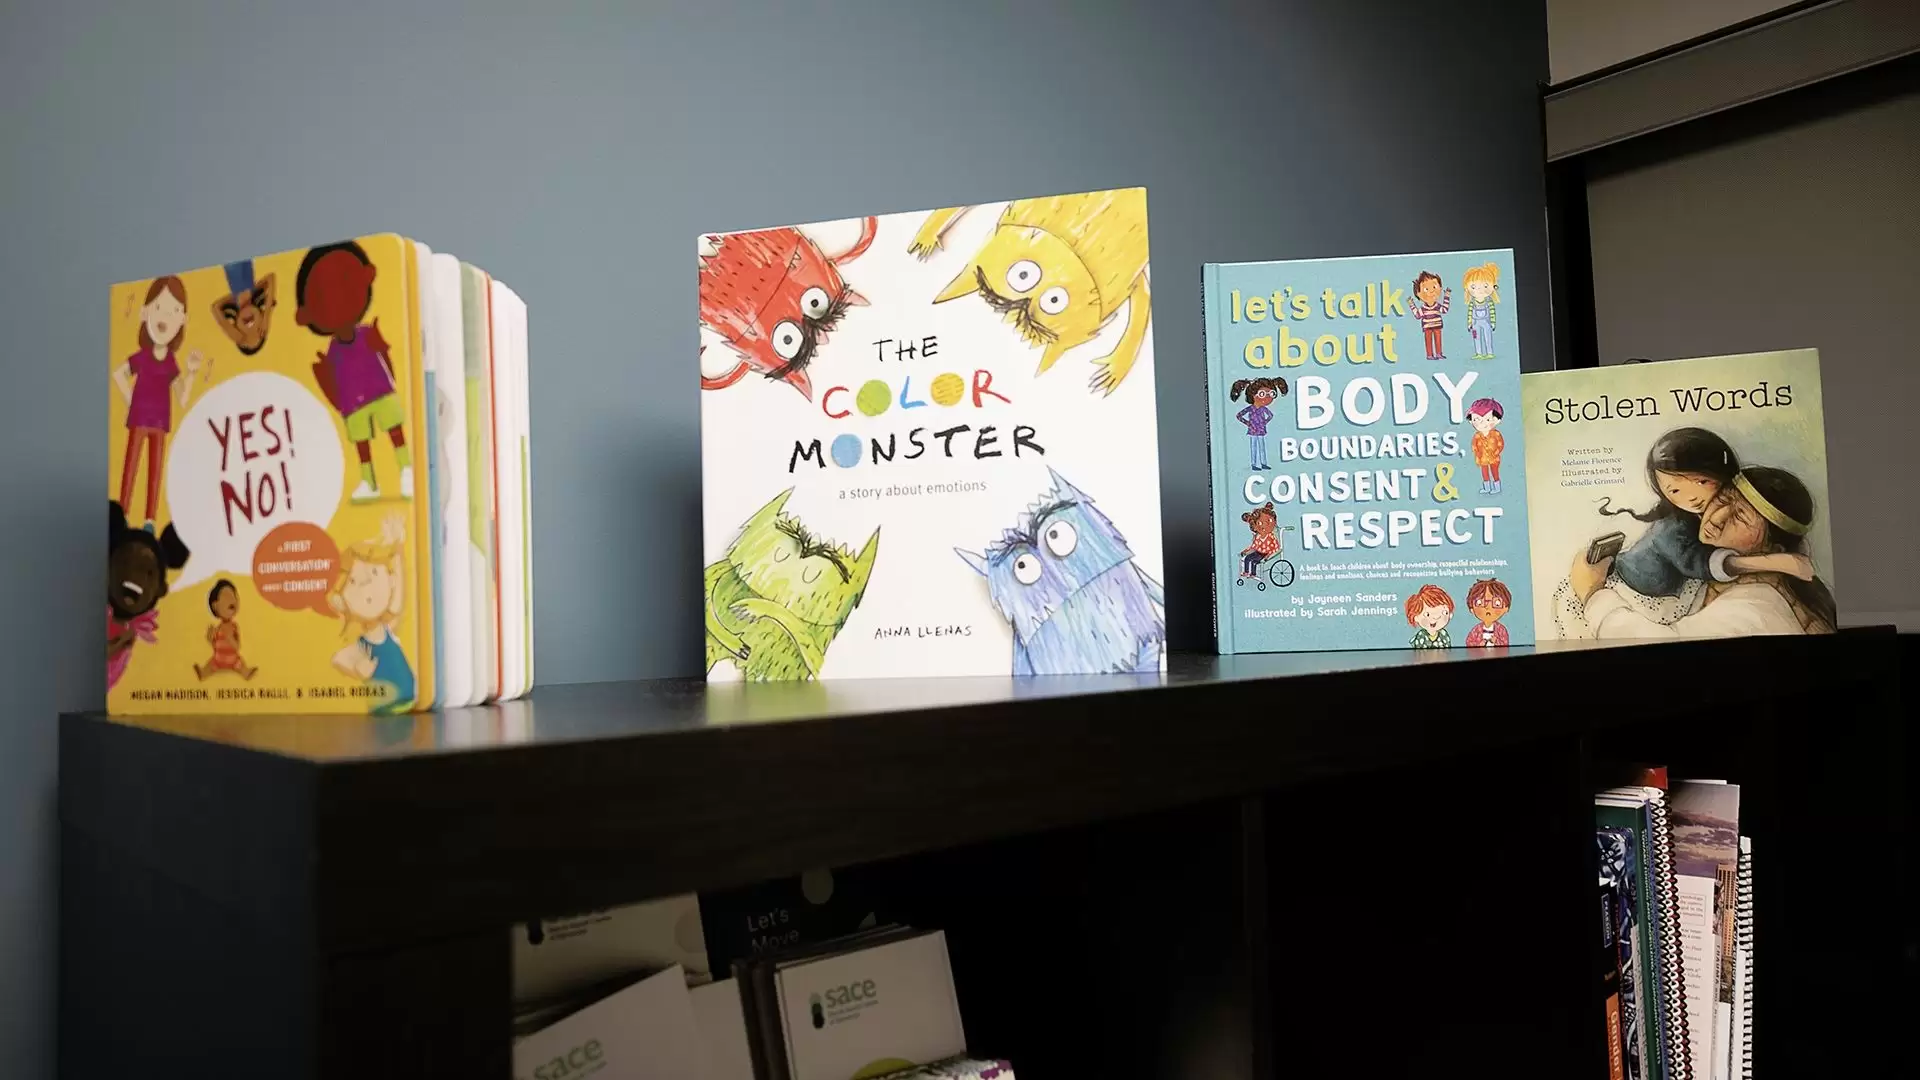 Four books with titles "Yes! No!", "The Color Monster", "Let's talk about body boundaries, consent & respect", and "Stolen Words" displayed on a dark bookshelf against a blue wall.